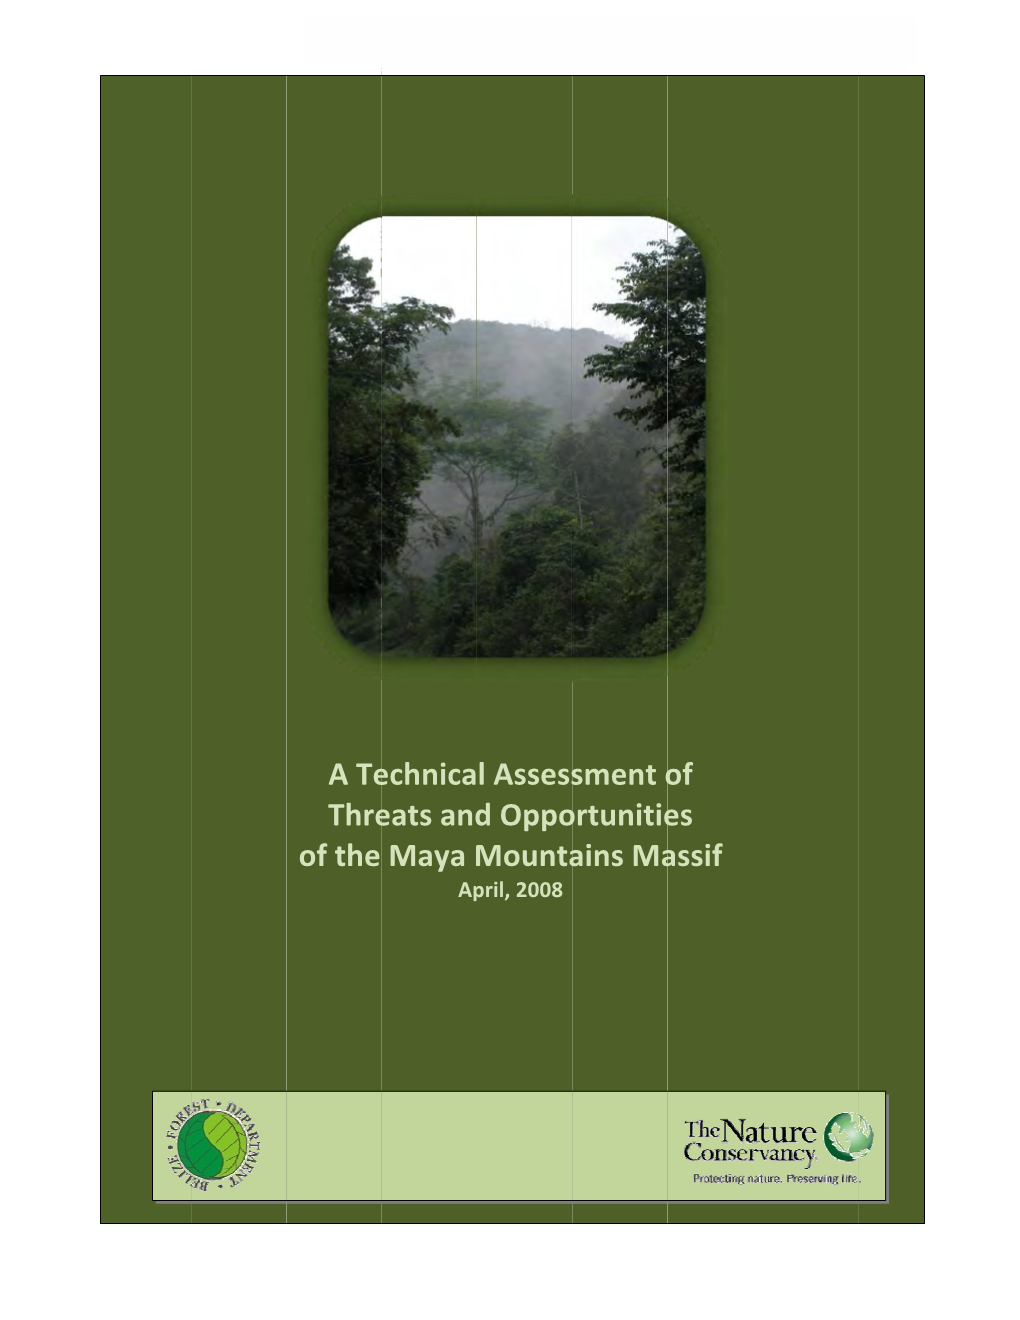 Technical Assessment of the Maya Mountains Massif –Threats and Opportunities, 2008